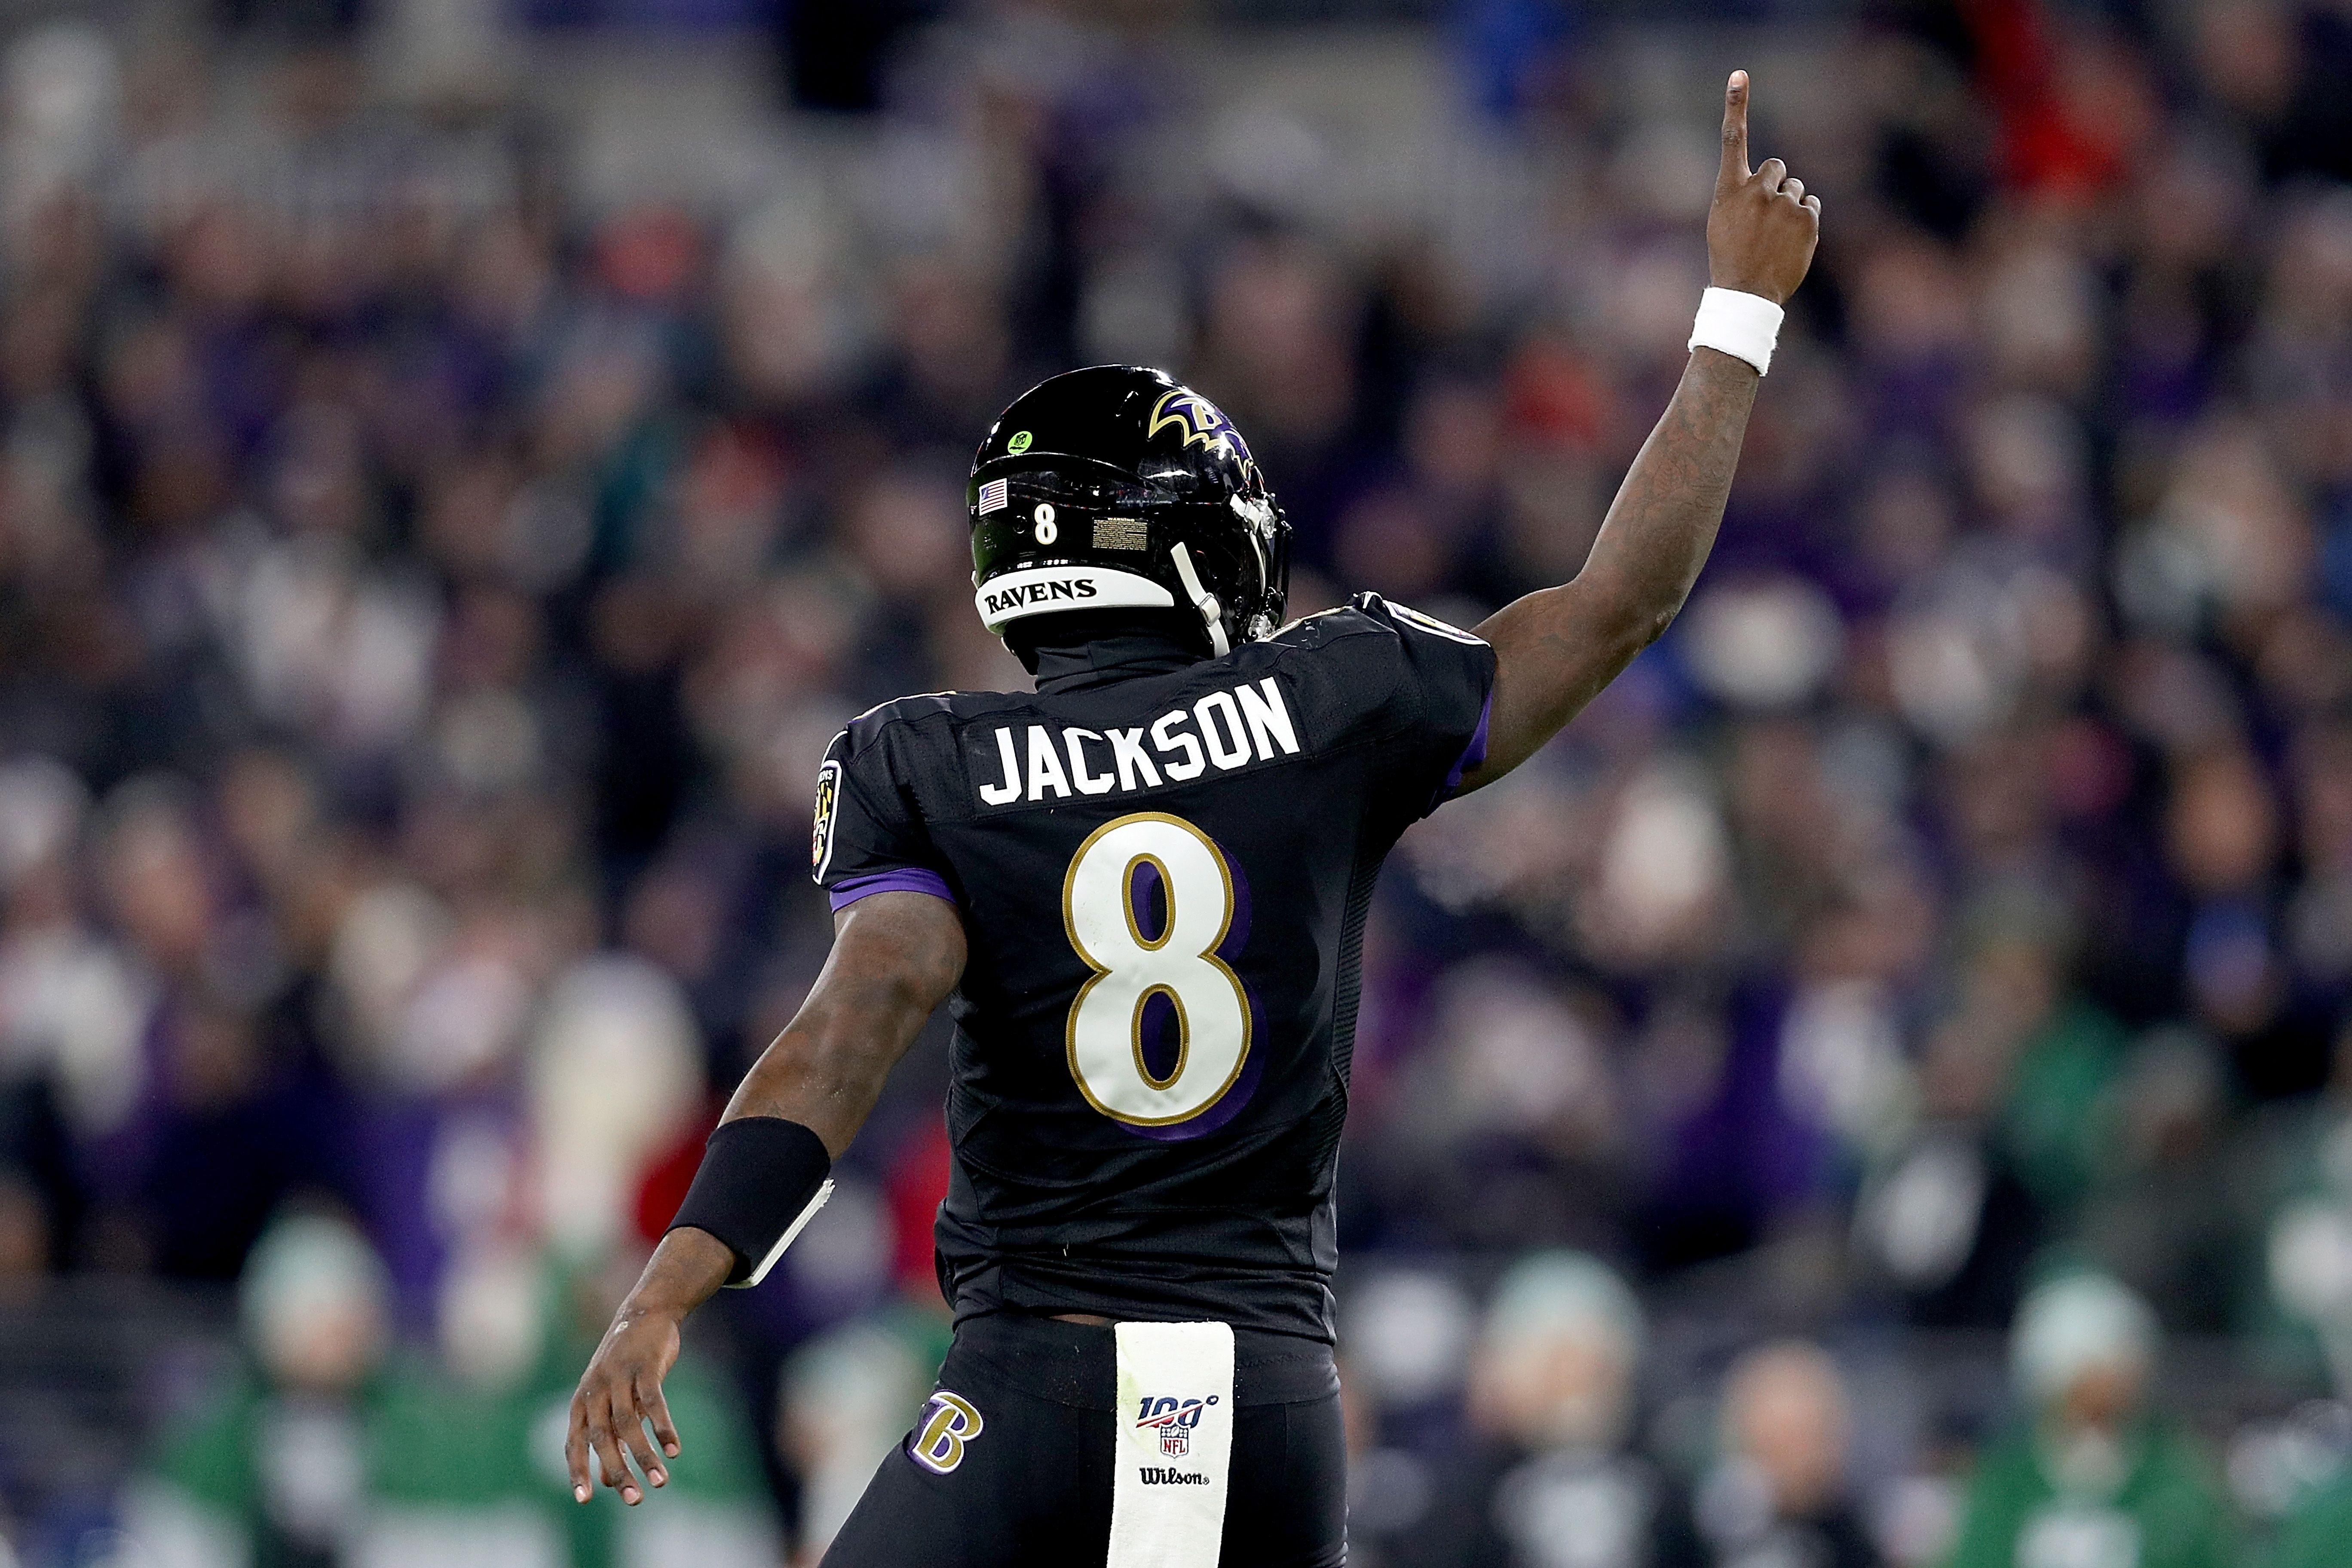 Madden 21 player ratings: Ravens QB Lamar Jackson snubbed from 99 club